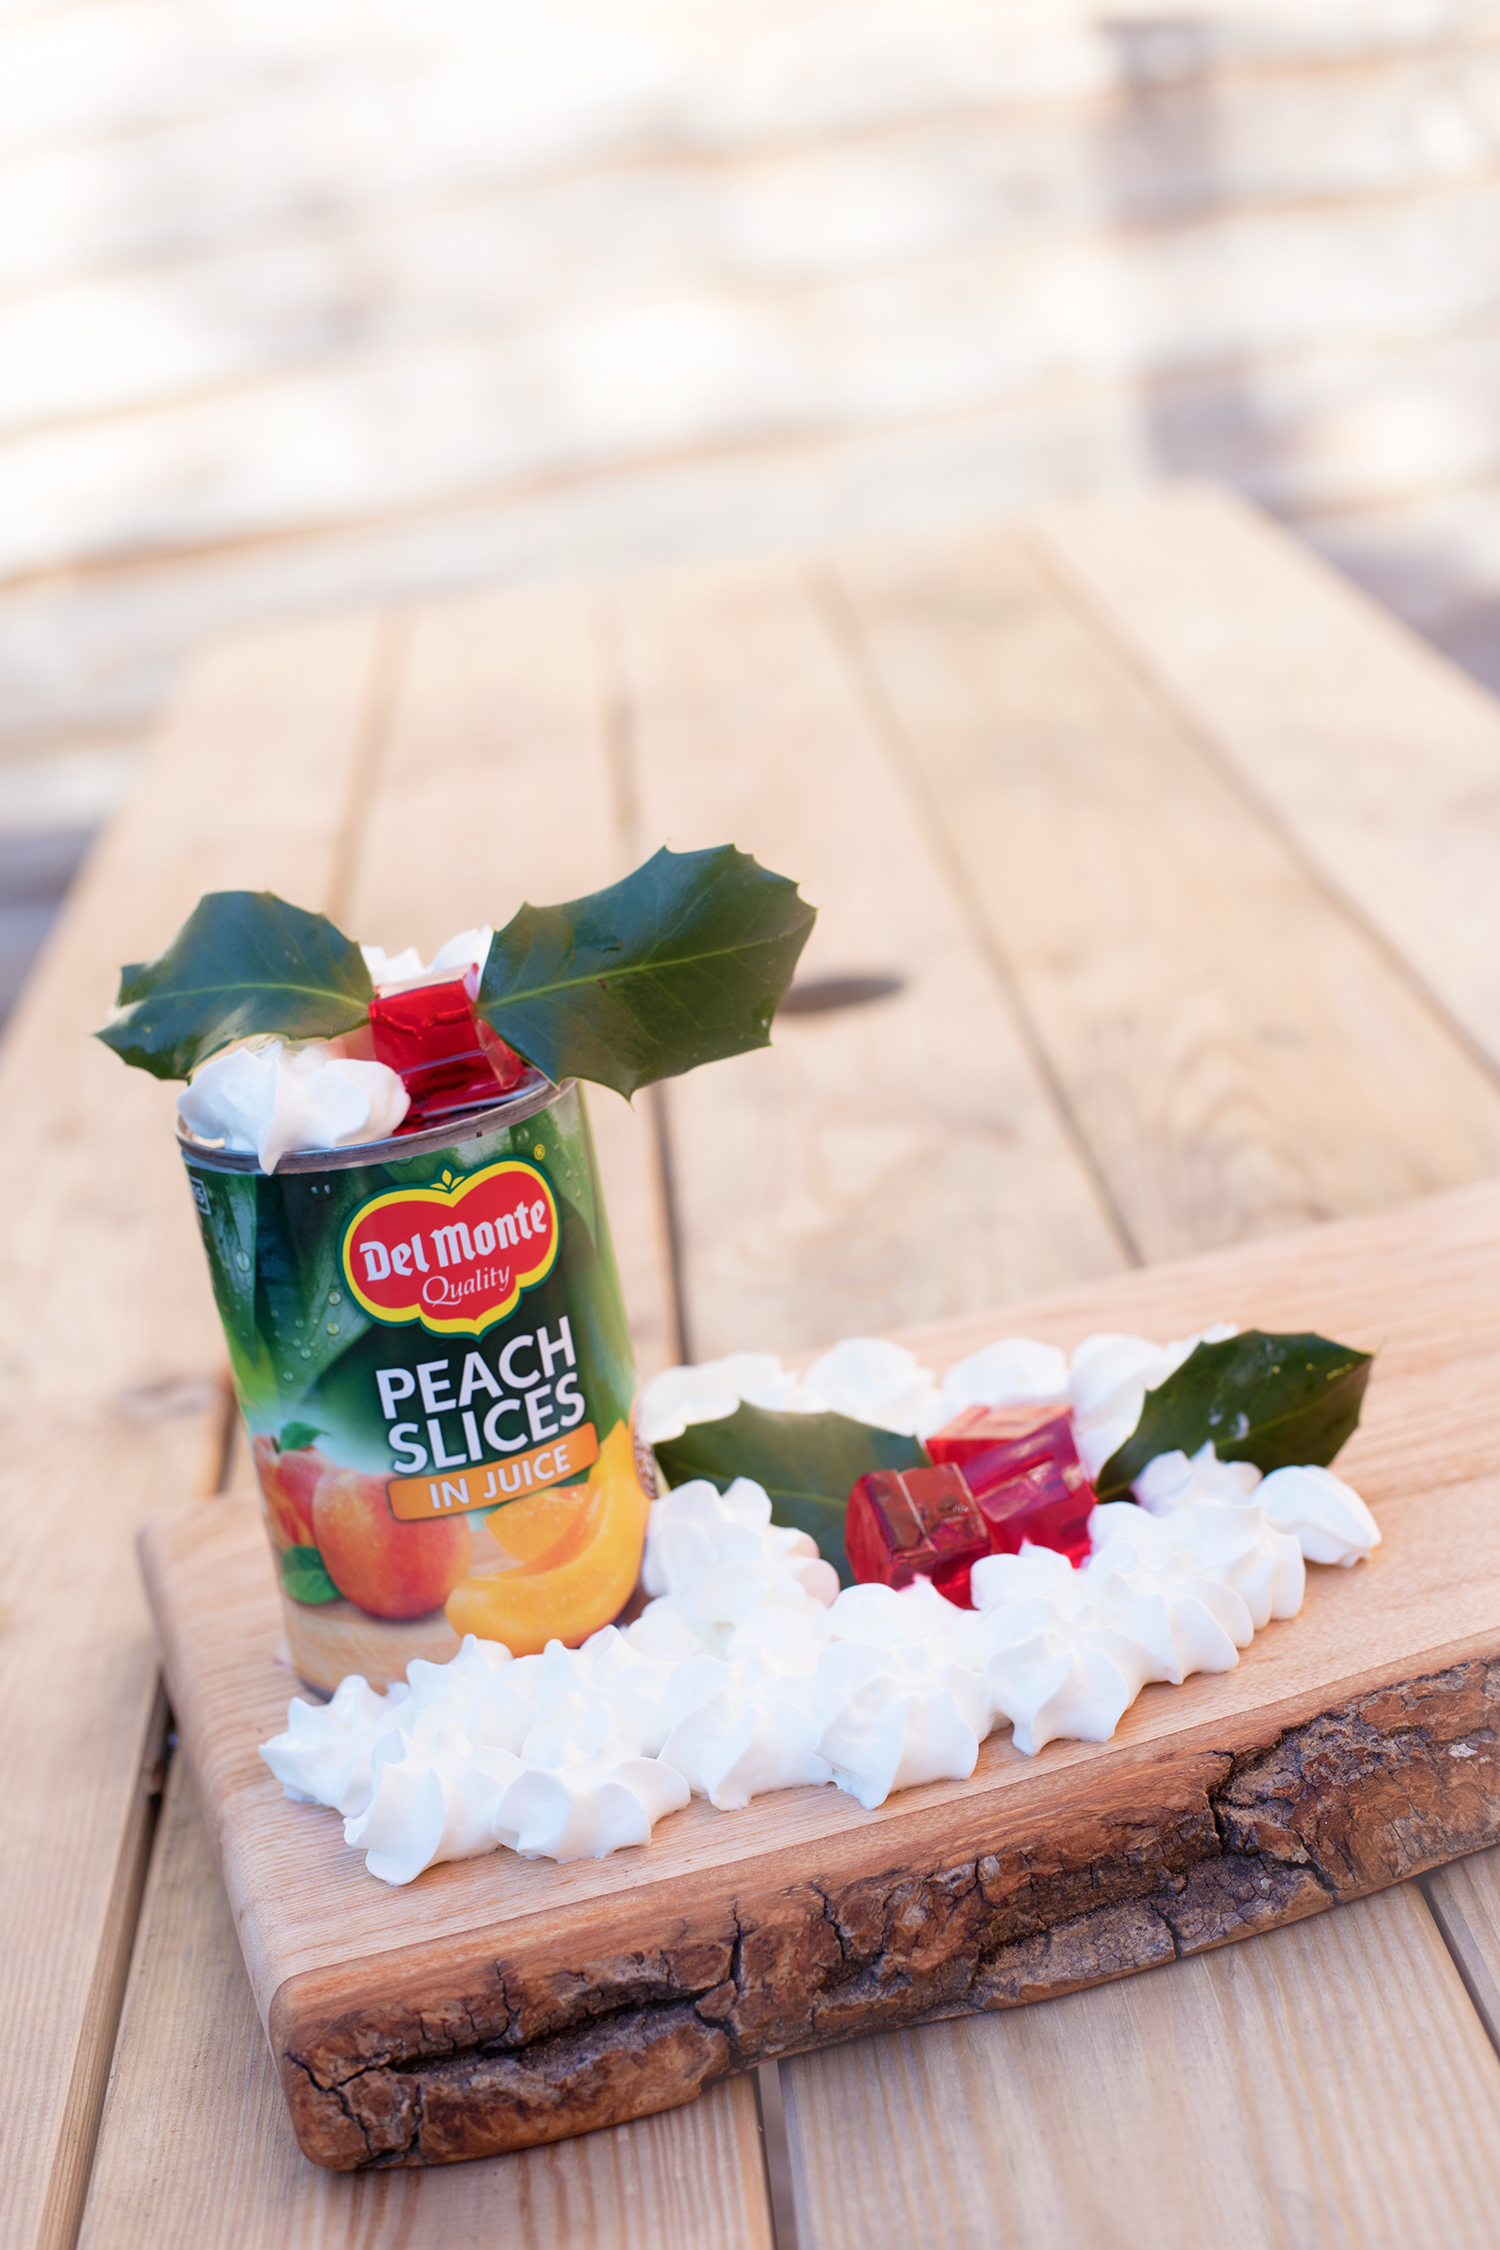 CHRISTMAS HAMPER GIVEAWAY – SAY #YESTOTHEBEST WITH DEL MONTE